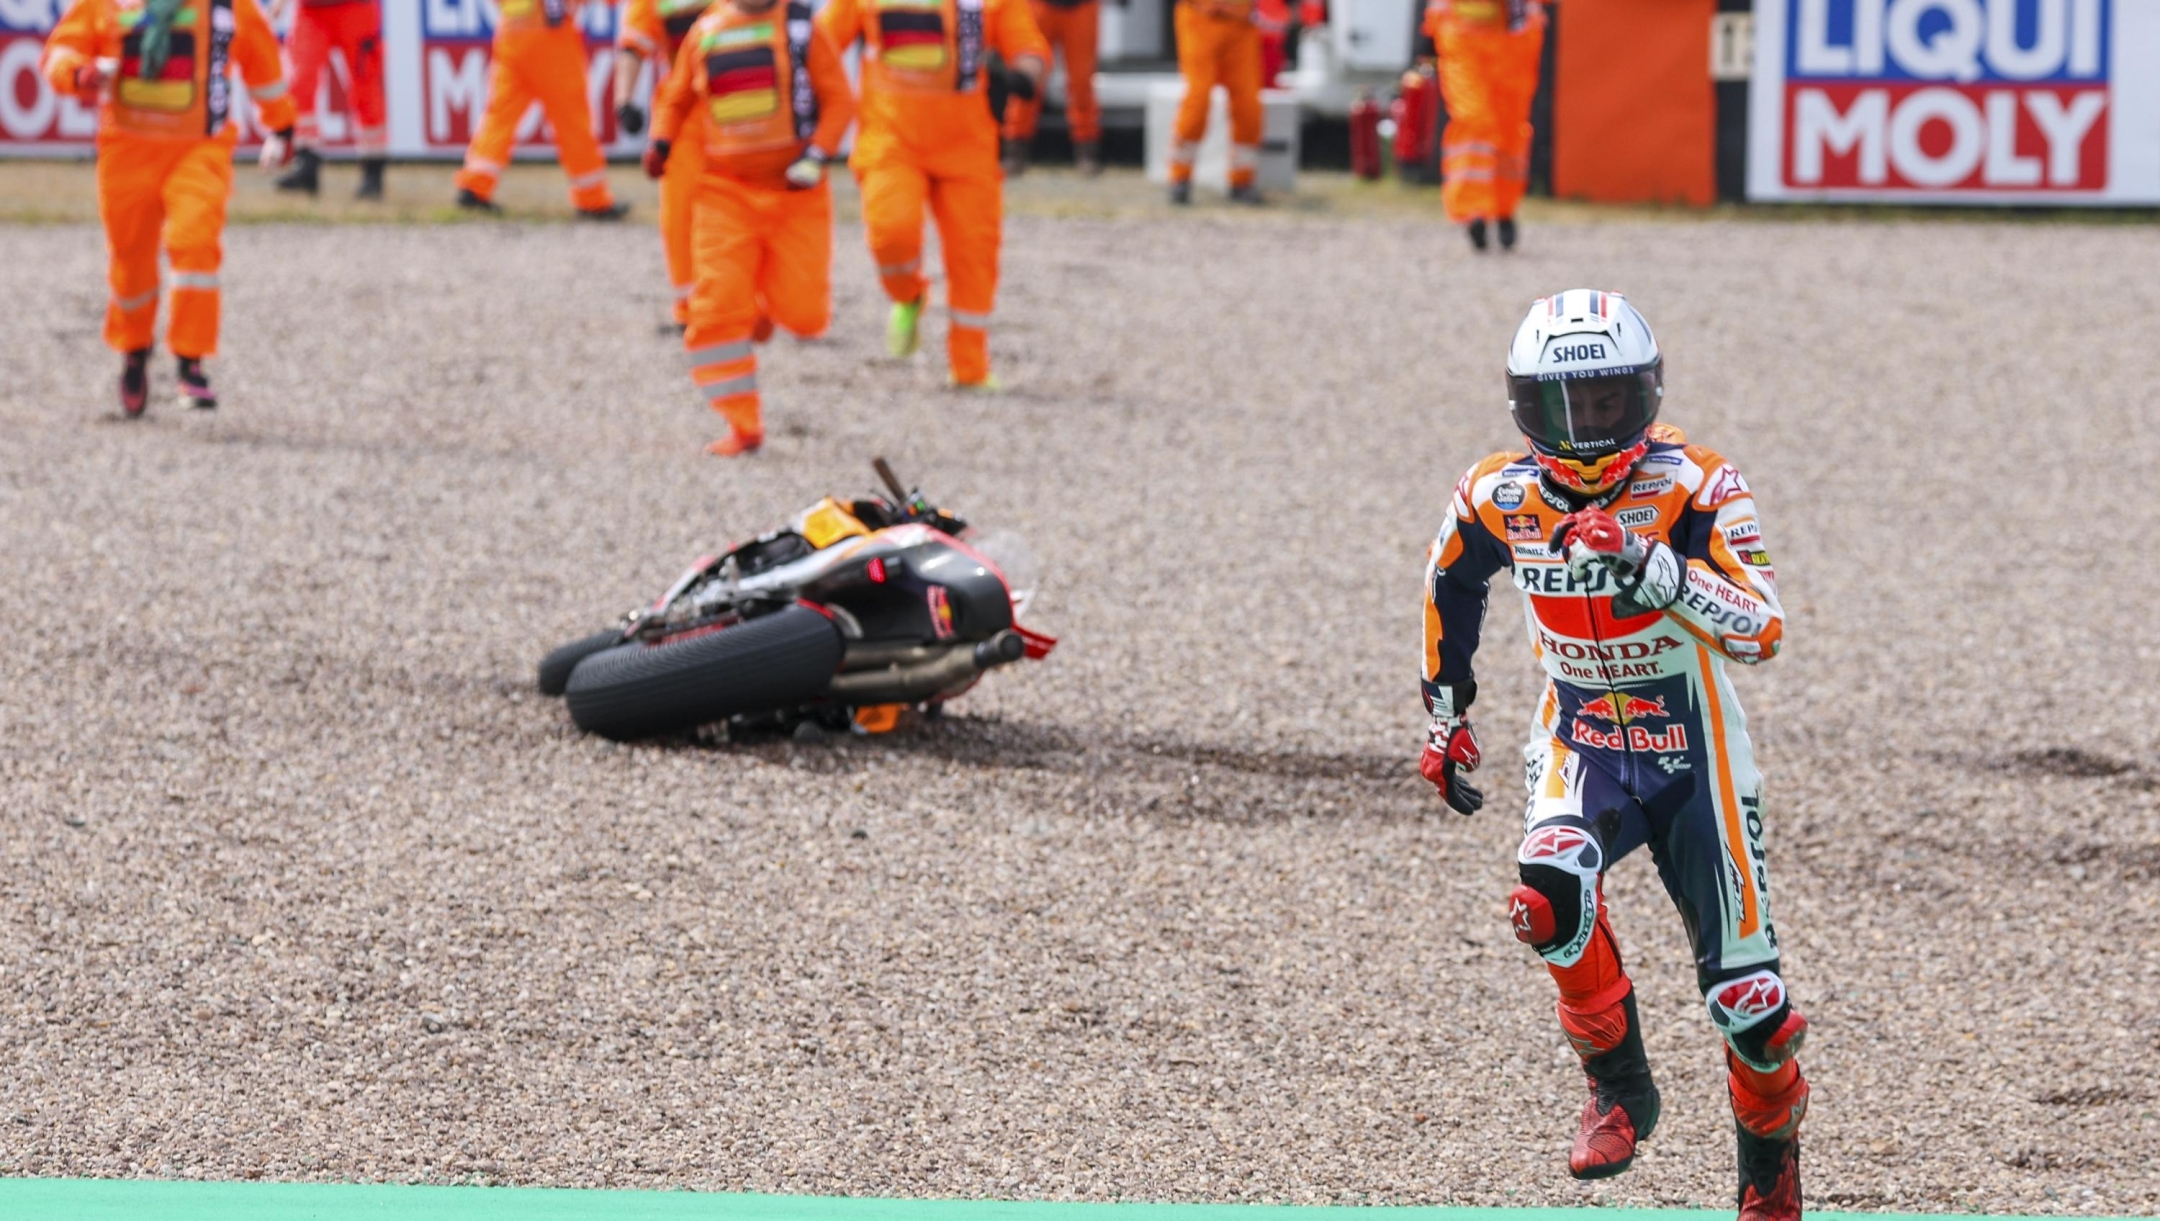 Marc Marquez from Spain runs to get a second bike after falling on his Repsol Honda during qualifying practice for the German Grand Prix at the Sachsenring in  Hohenstein-Ernstthal, Germany, Saturday, June 17, 2023. (Jan Woitas//dpa via AP)